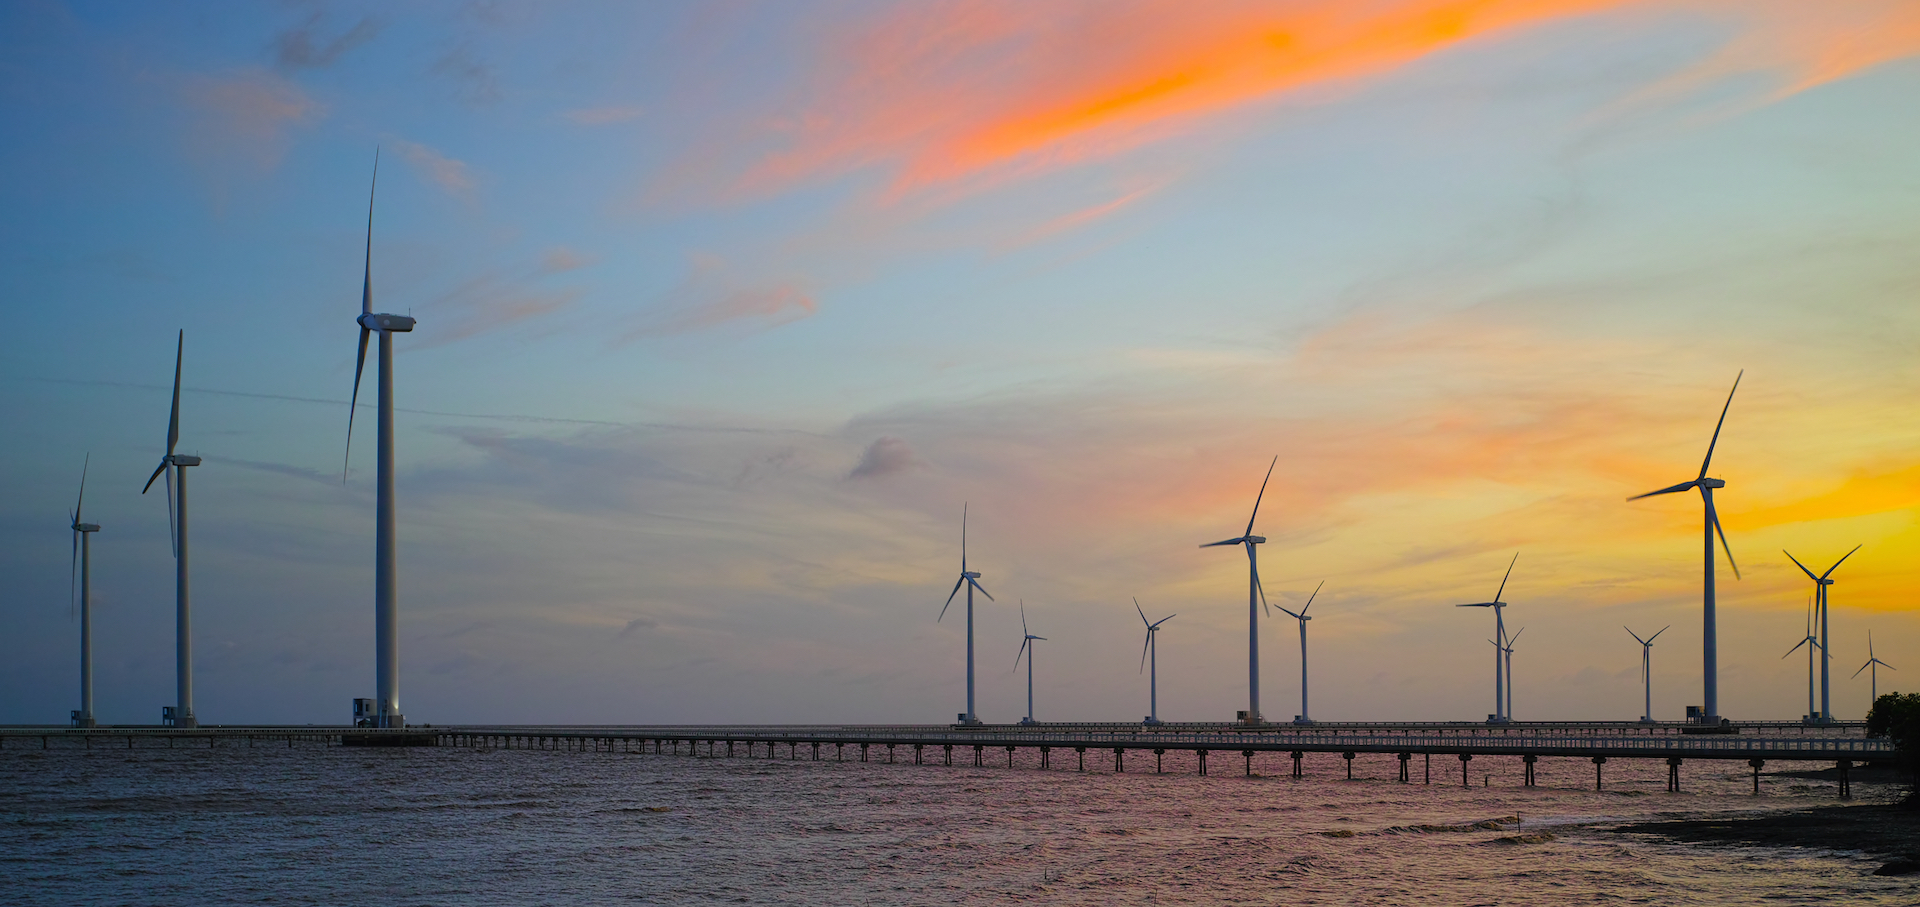 Offshore wind with sunset reflected in water